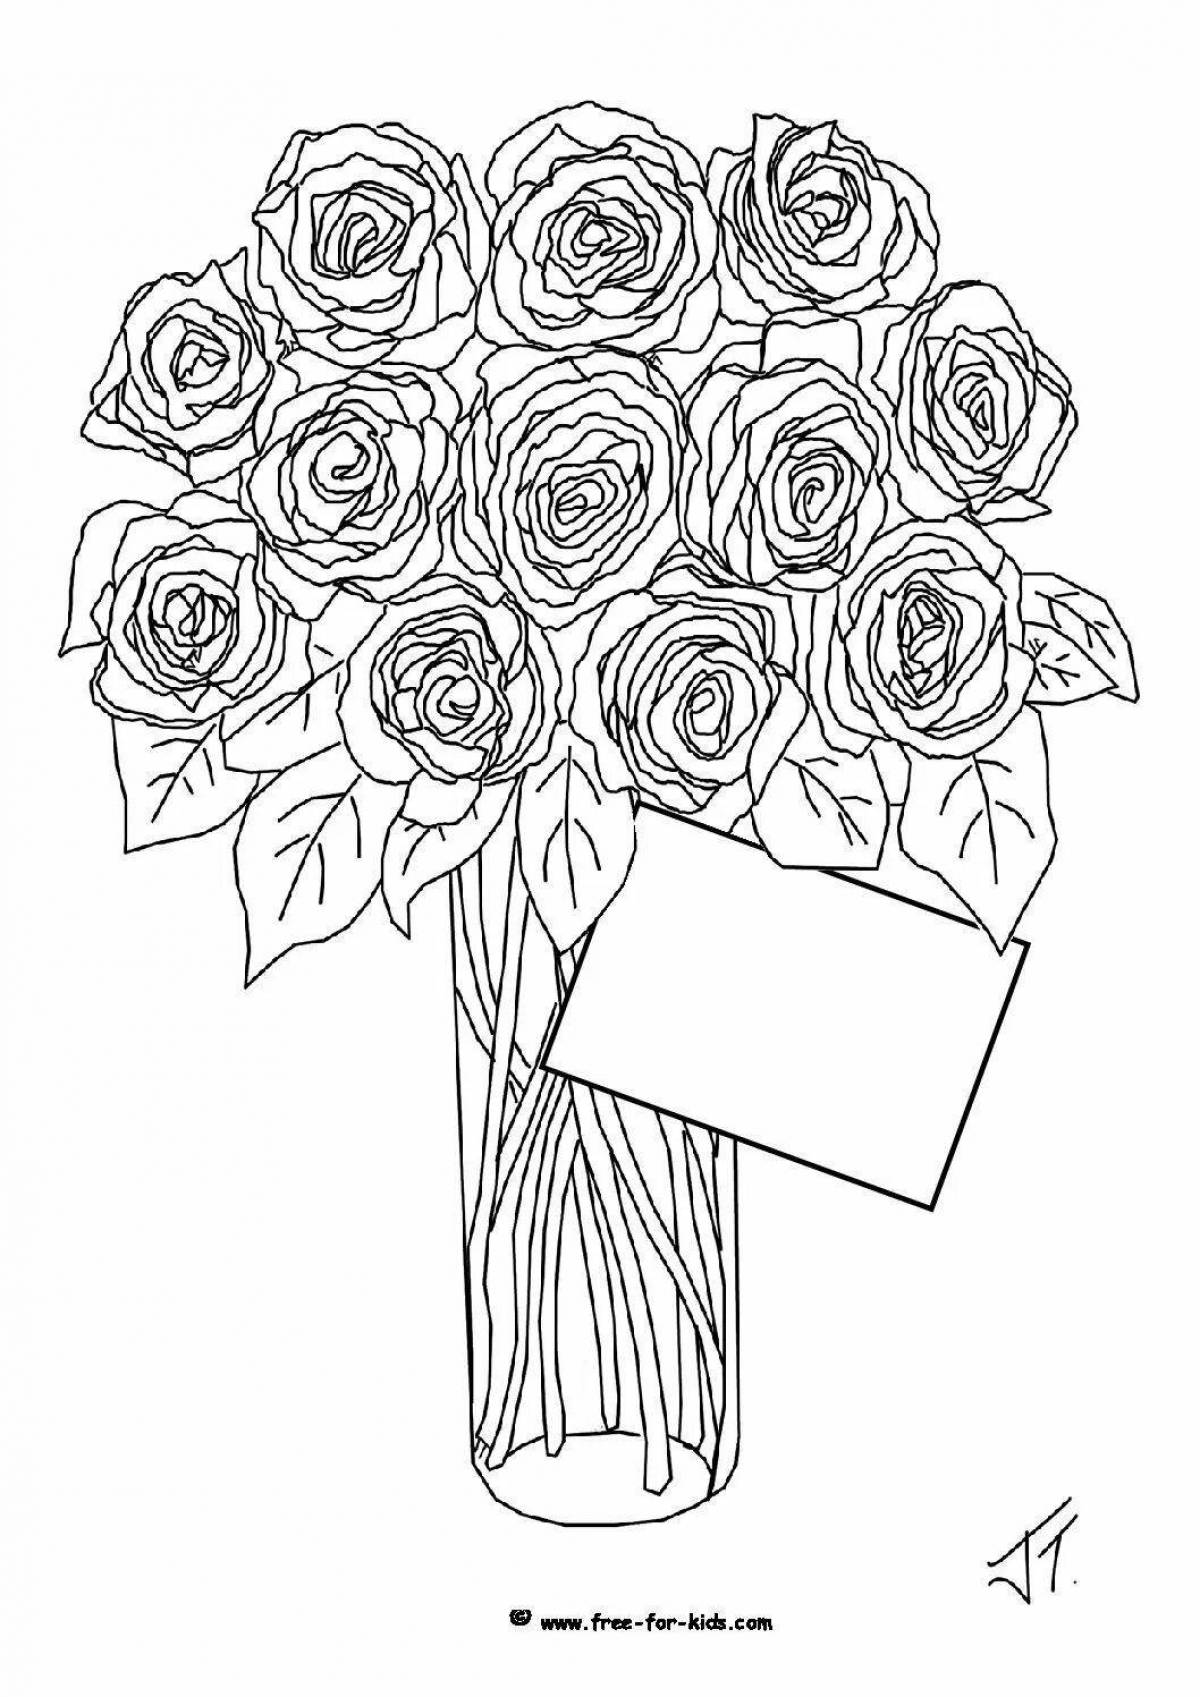 Gorgeous happy birthday rose coloring book